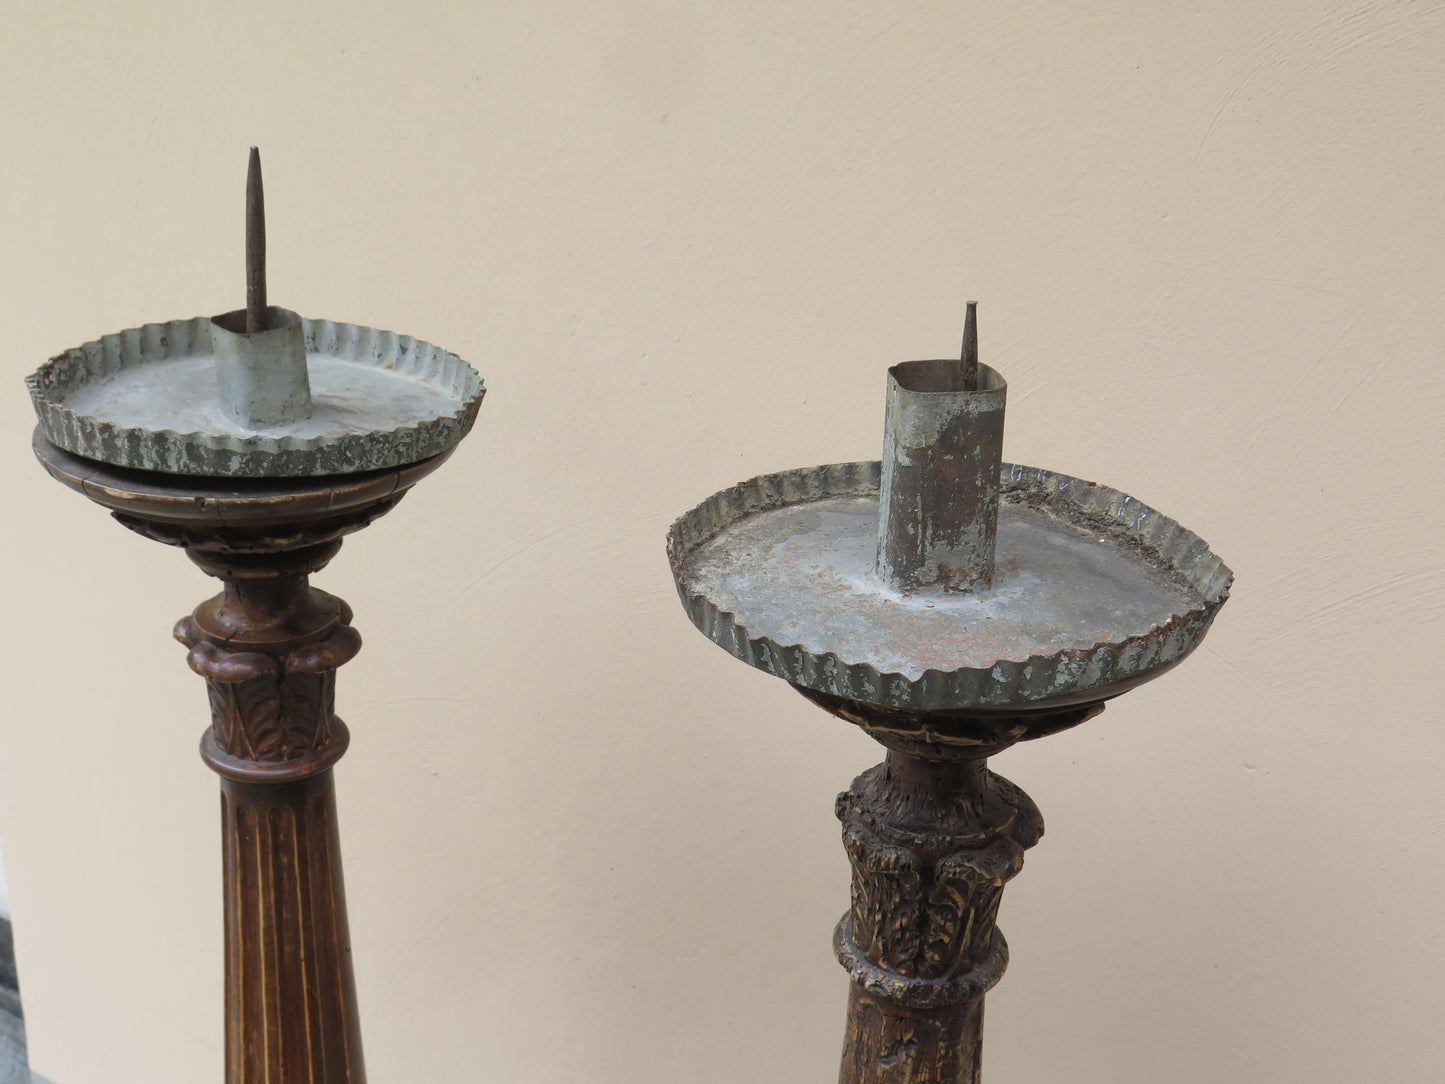 Two large wooden floor lamps pair of antique wooden torch holders Large XM ceremonial candlestick